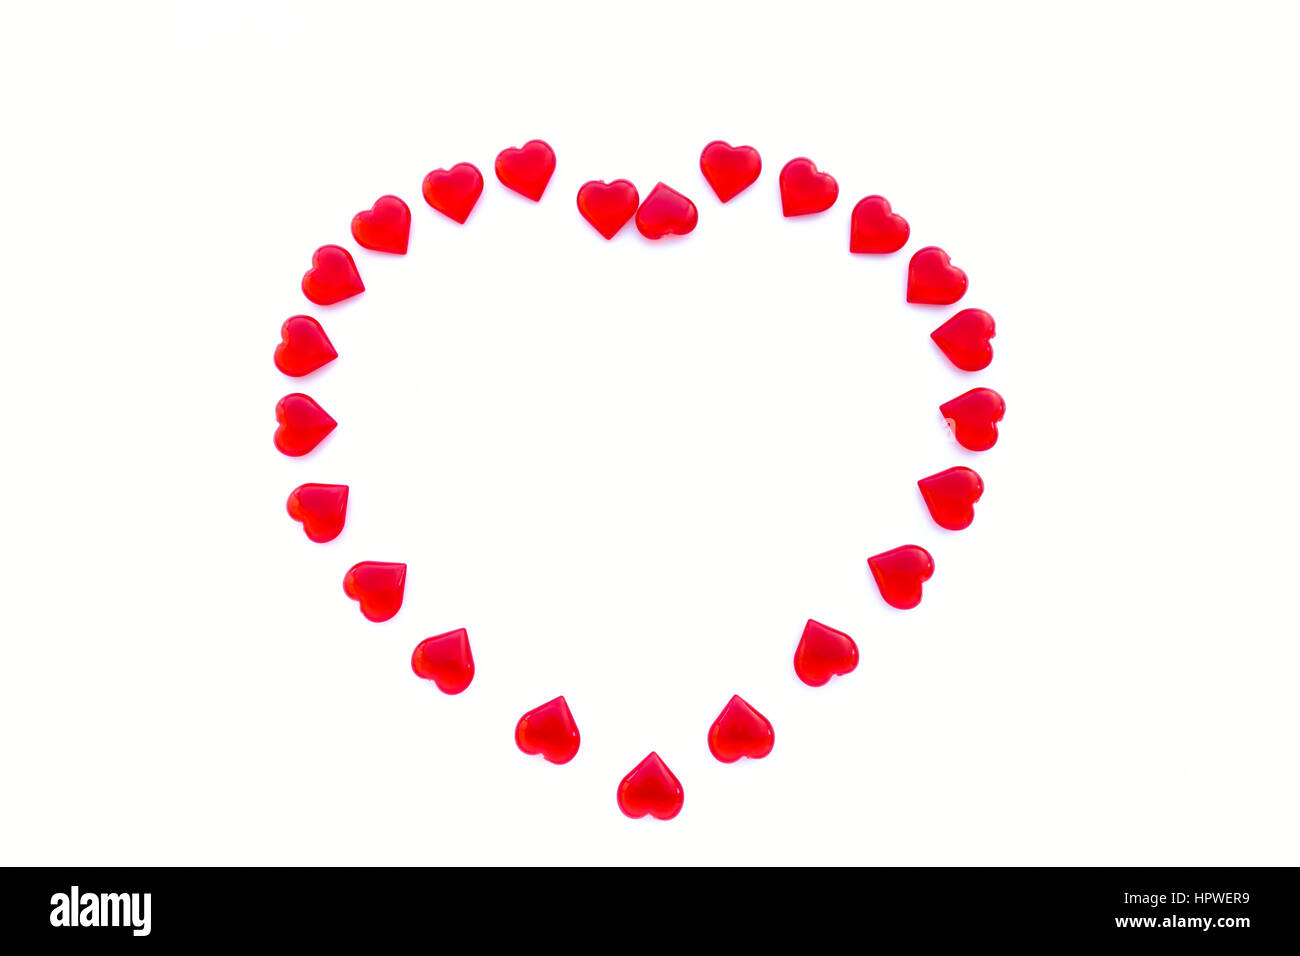 Large heart shaped out of small shiny acrylic red hearts on white background with lots of copy space. Stock Photo